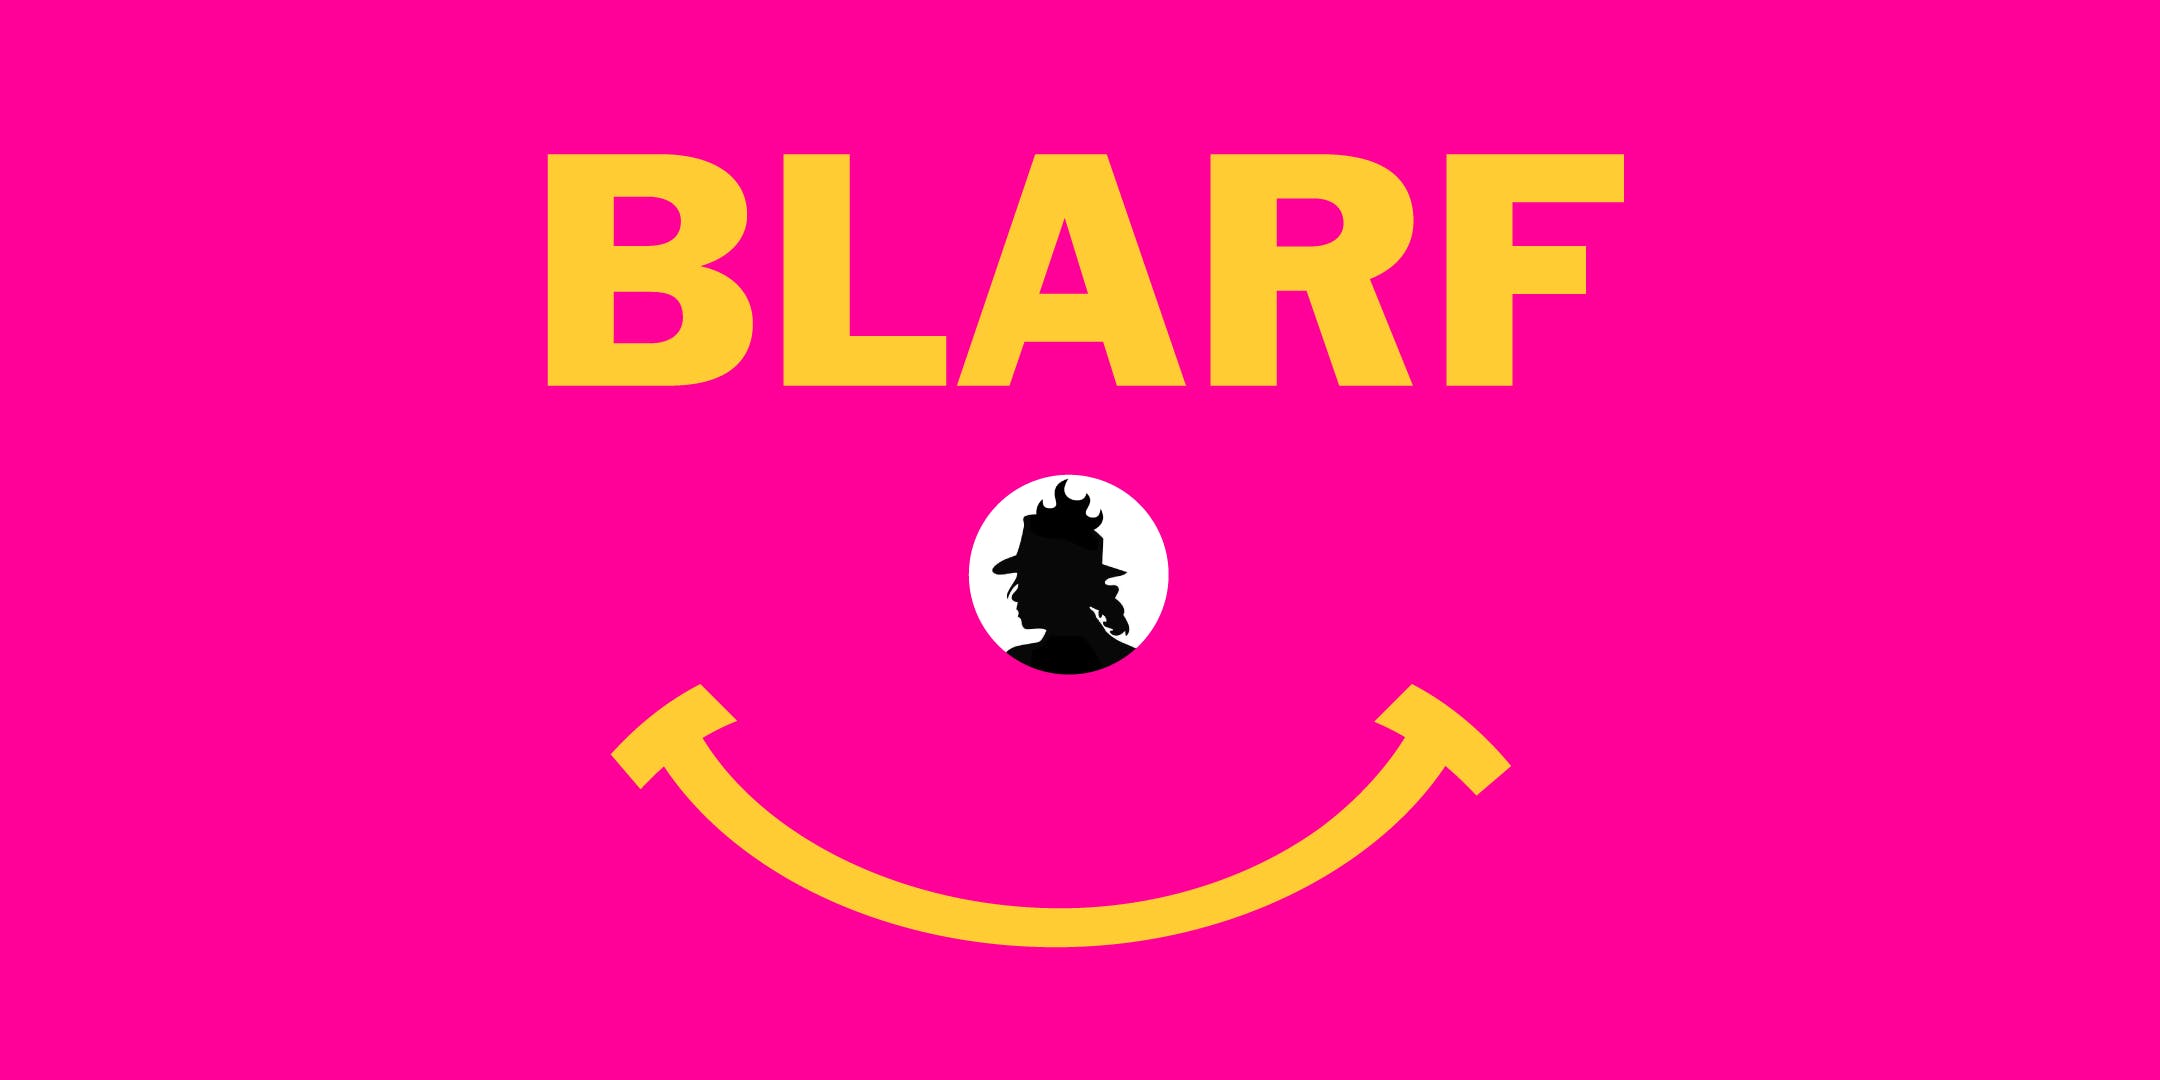 But, it appears Eric André is resurrecting his music moniker BLARF. 